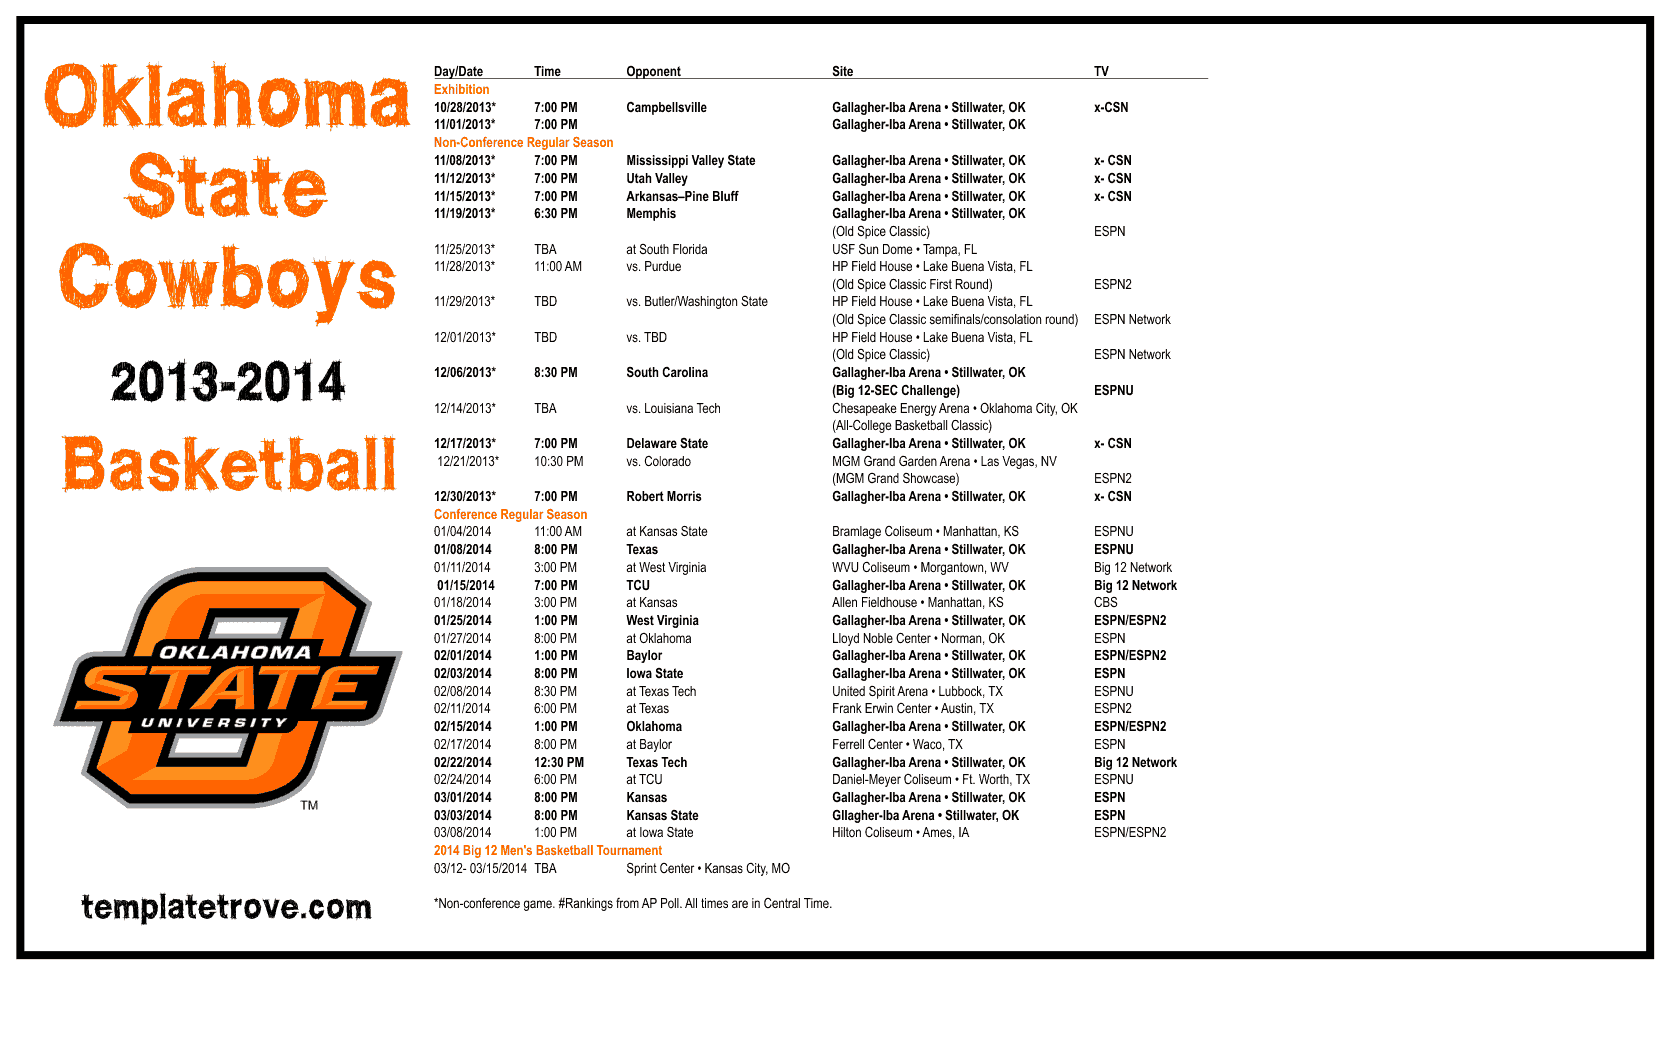 Image Gallery Oklahoma State Football Schedule